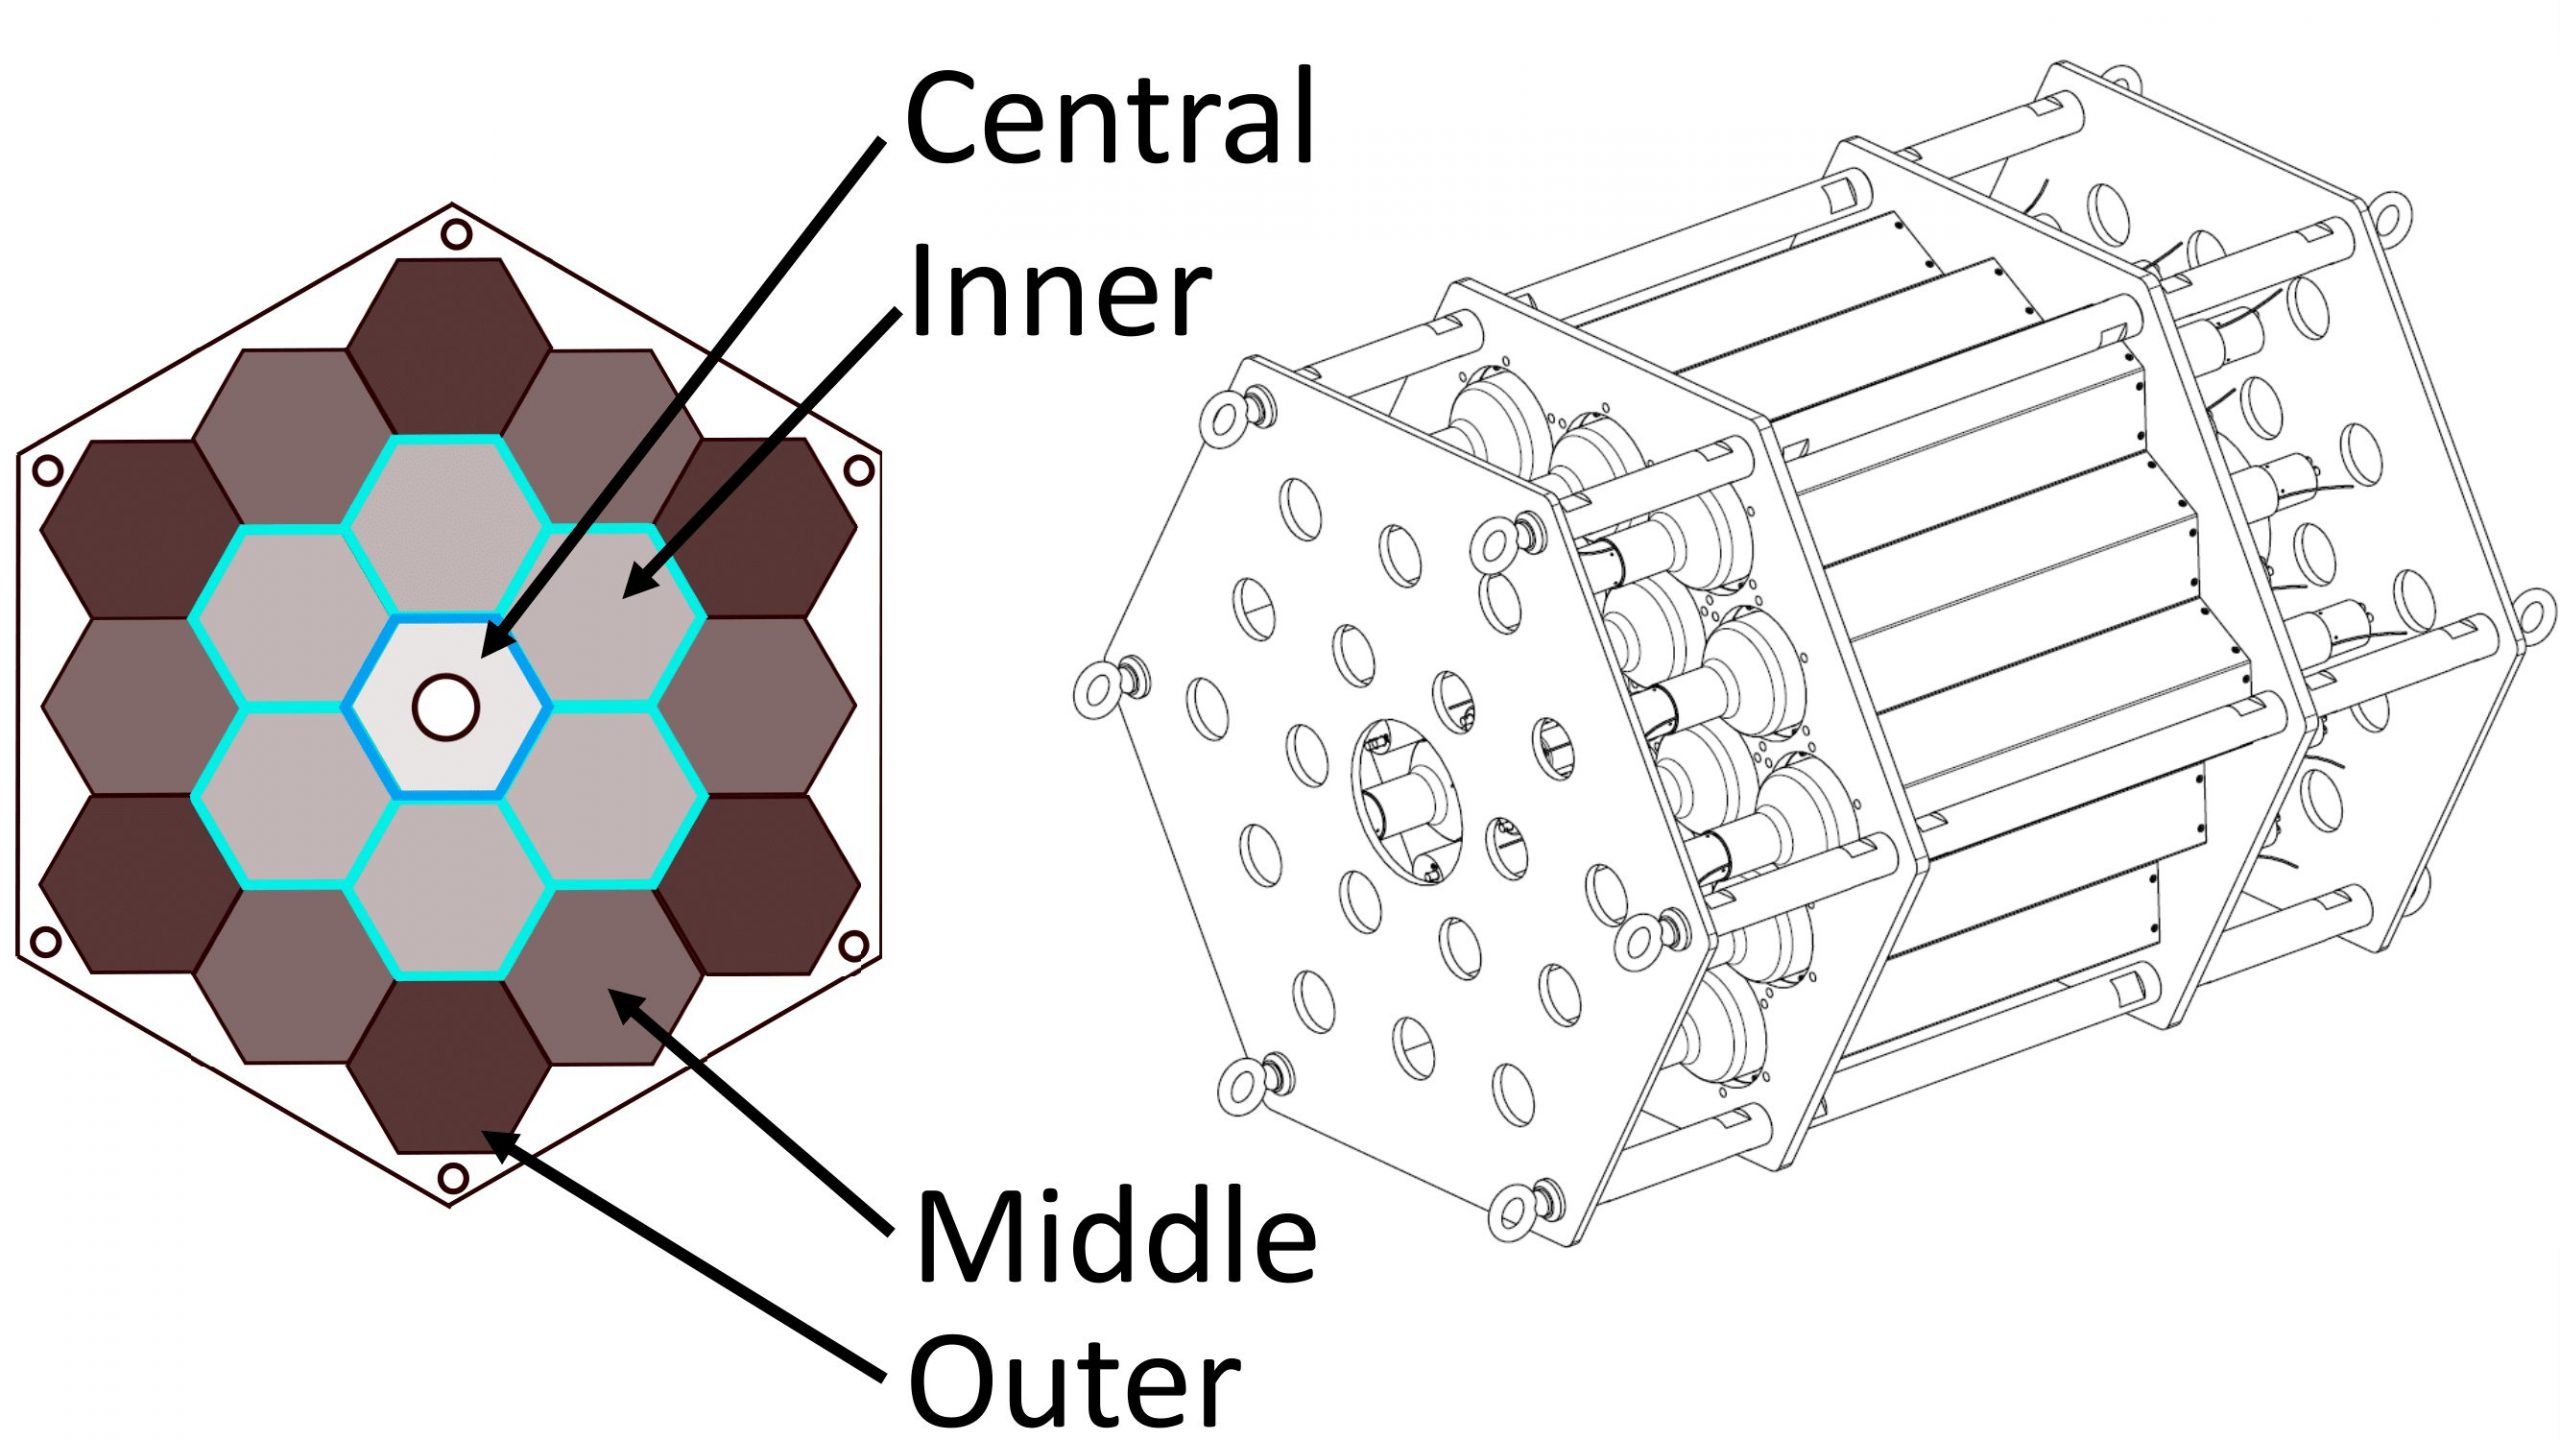 On the left is a cross section of MTAS showing a large hexagon with smaller brown and grey hexagons inside. Brown hexagons create 1 layer closest to the edges of the outer hexagon, grey hexagons with a bright blue outline create the next layer, and a single light grey hexagon with a circle in the middle is in the centre. Arrows indicate that the space between the brown hexagons and the edges of the large hexagon is 'Outer', the brown hexagon layer is 'Middle', the blue-outlined, grey hexagons are 'Inner', and the centre hexagon is 'Central'. On the right is a black and white line image of MTAS, with its full length shown to have three sections filled with various cylinders.